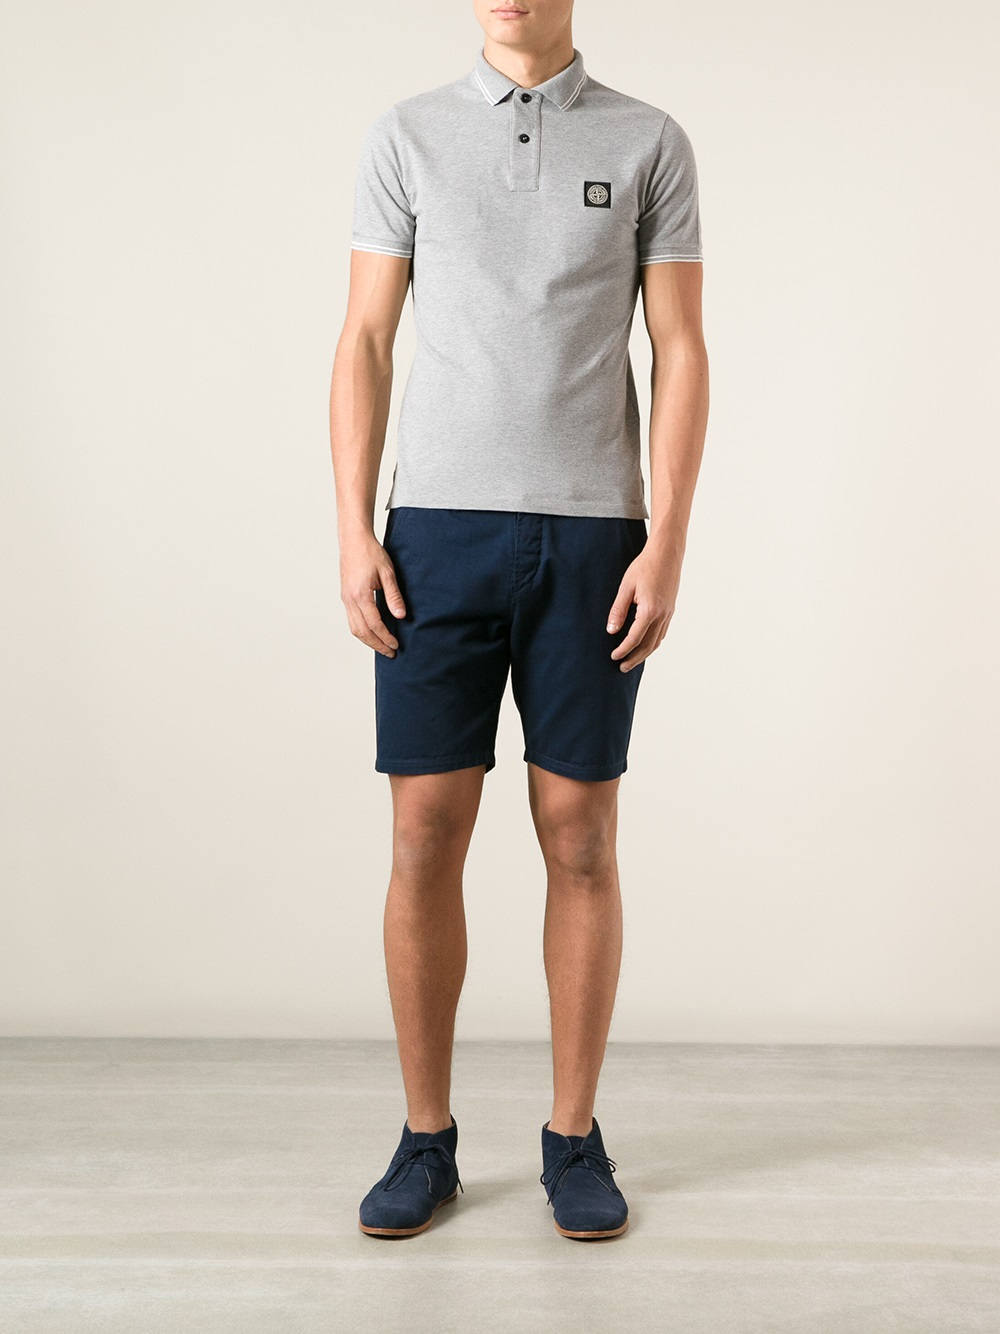 Stone Island Polo Shirt in Grey (Gray) for Men - Lyst